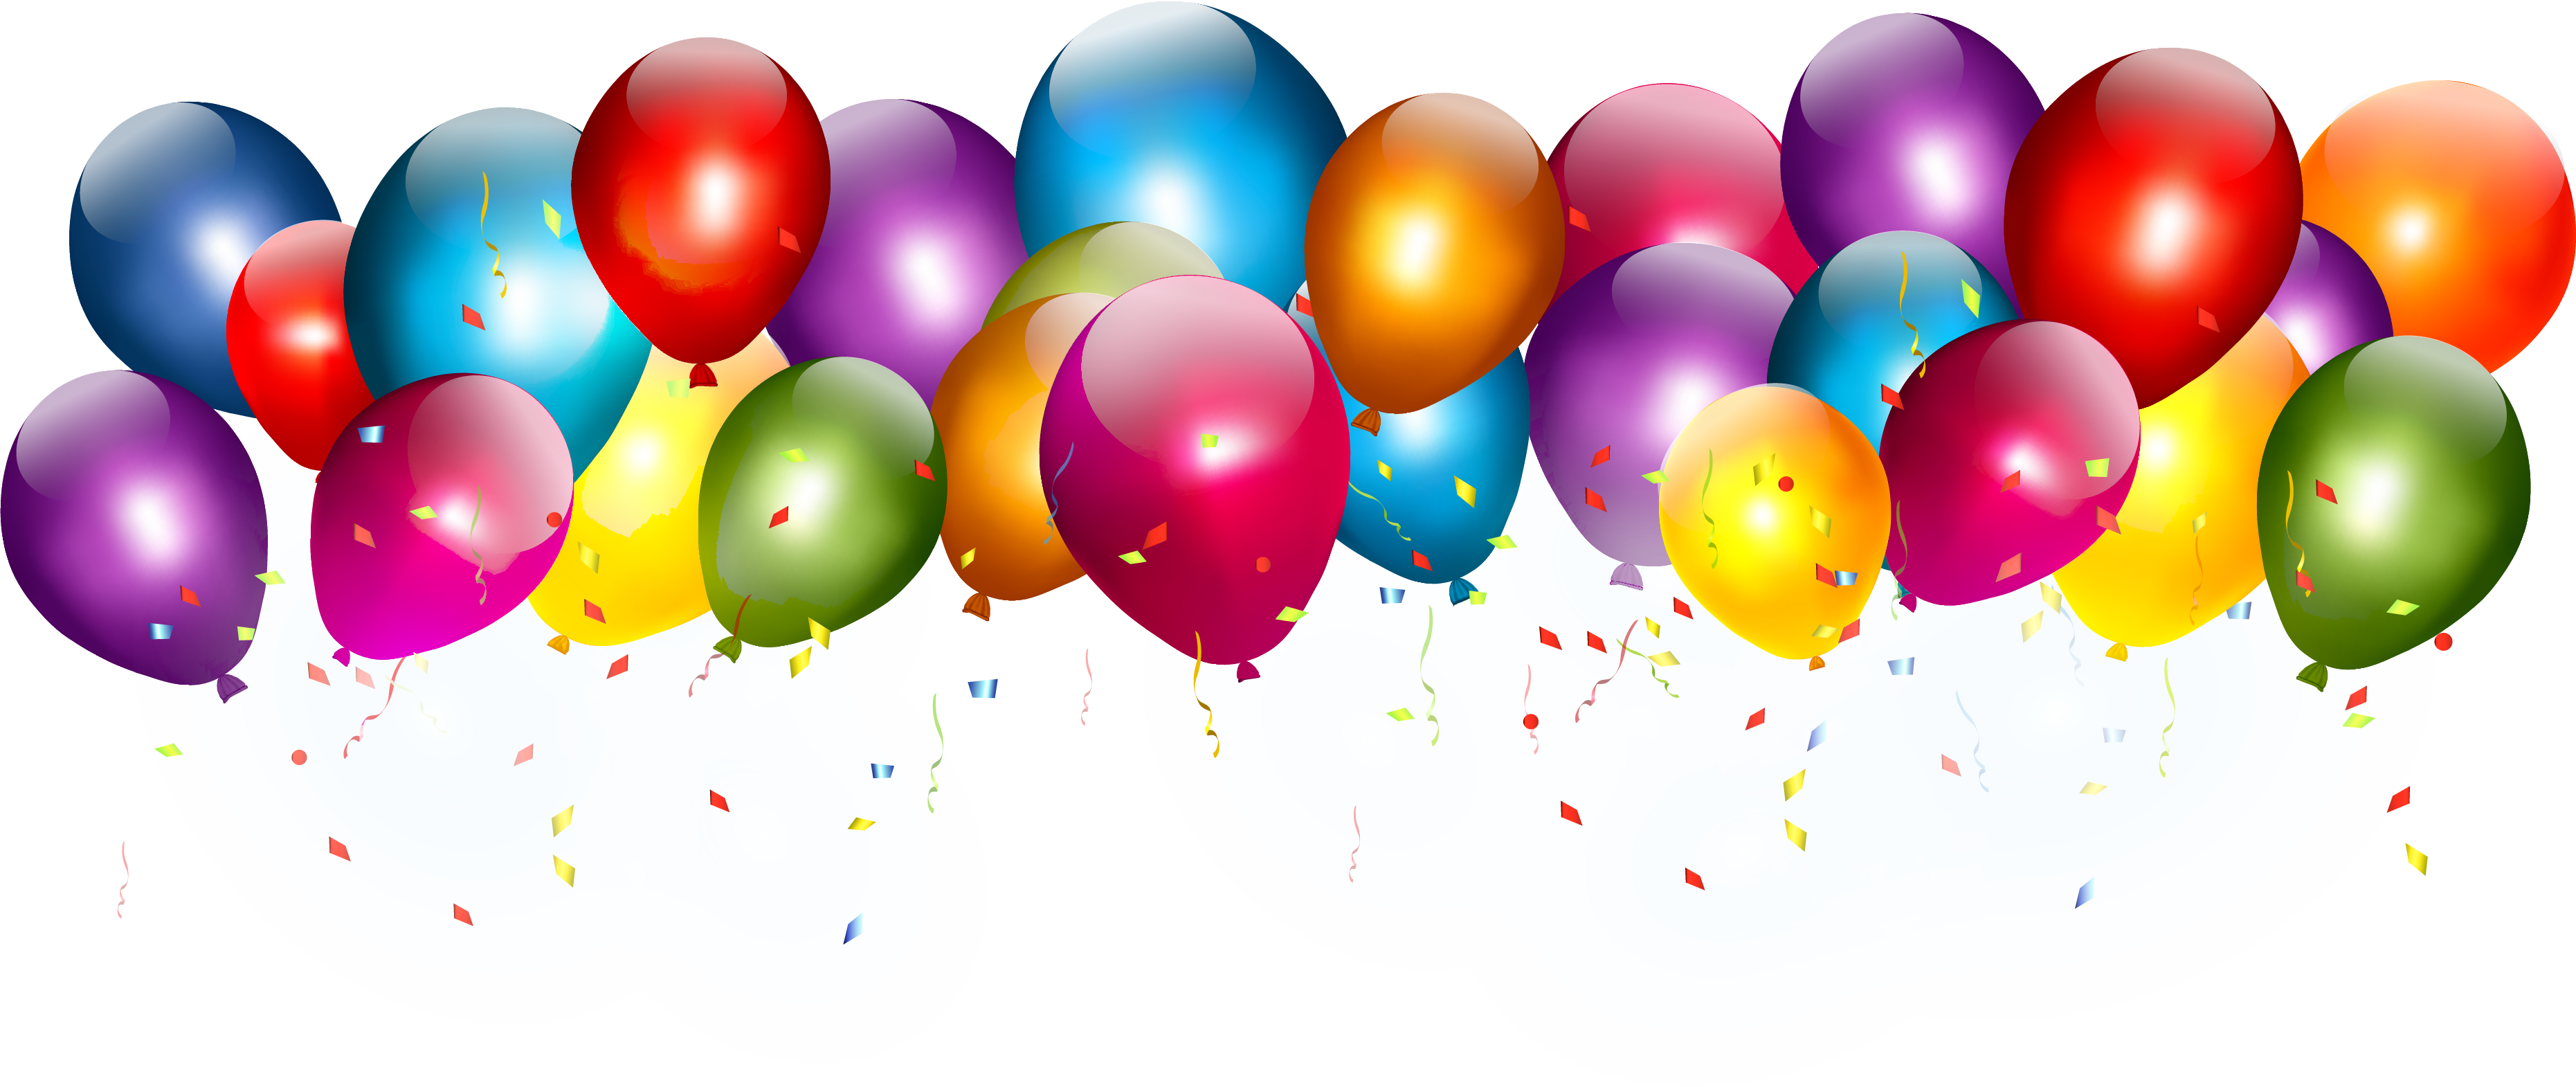 Free Balloon Png Transparent, Download Free Clip Art, Free ...